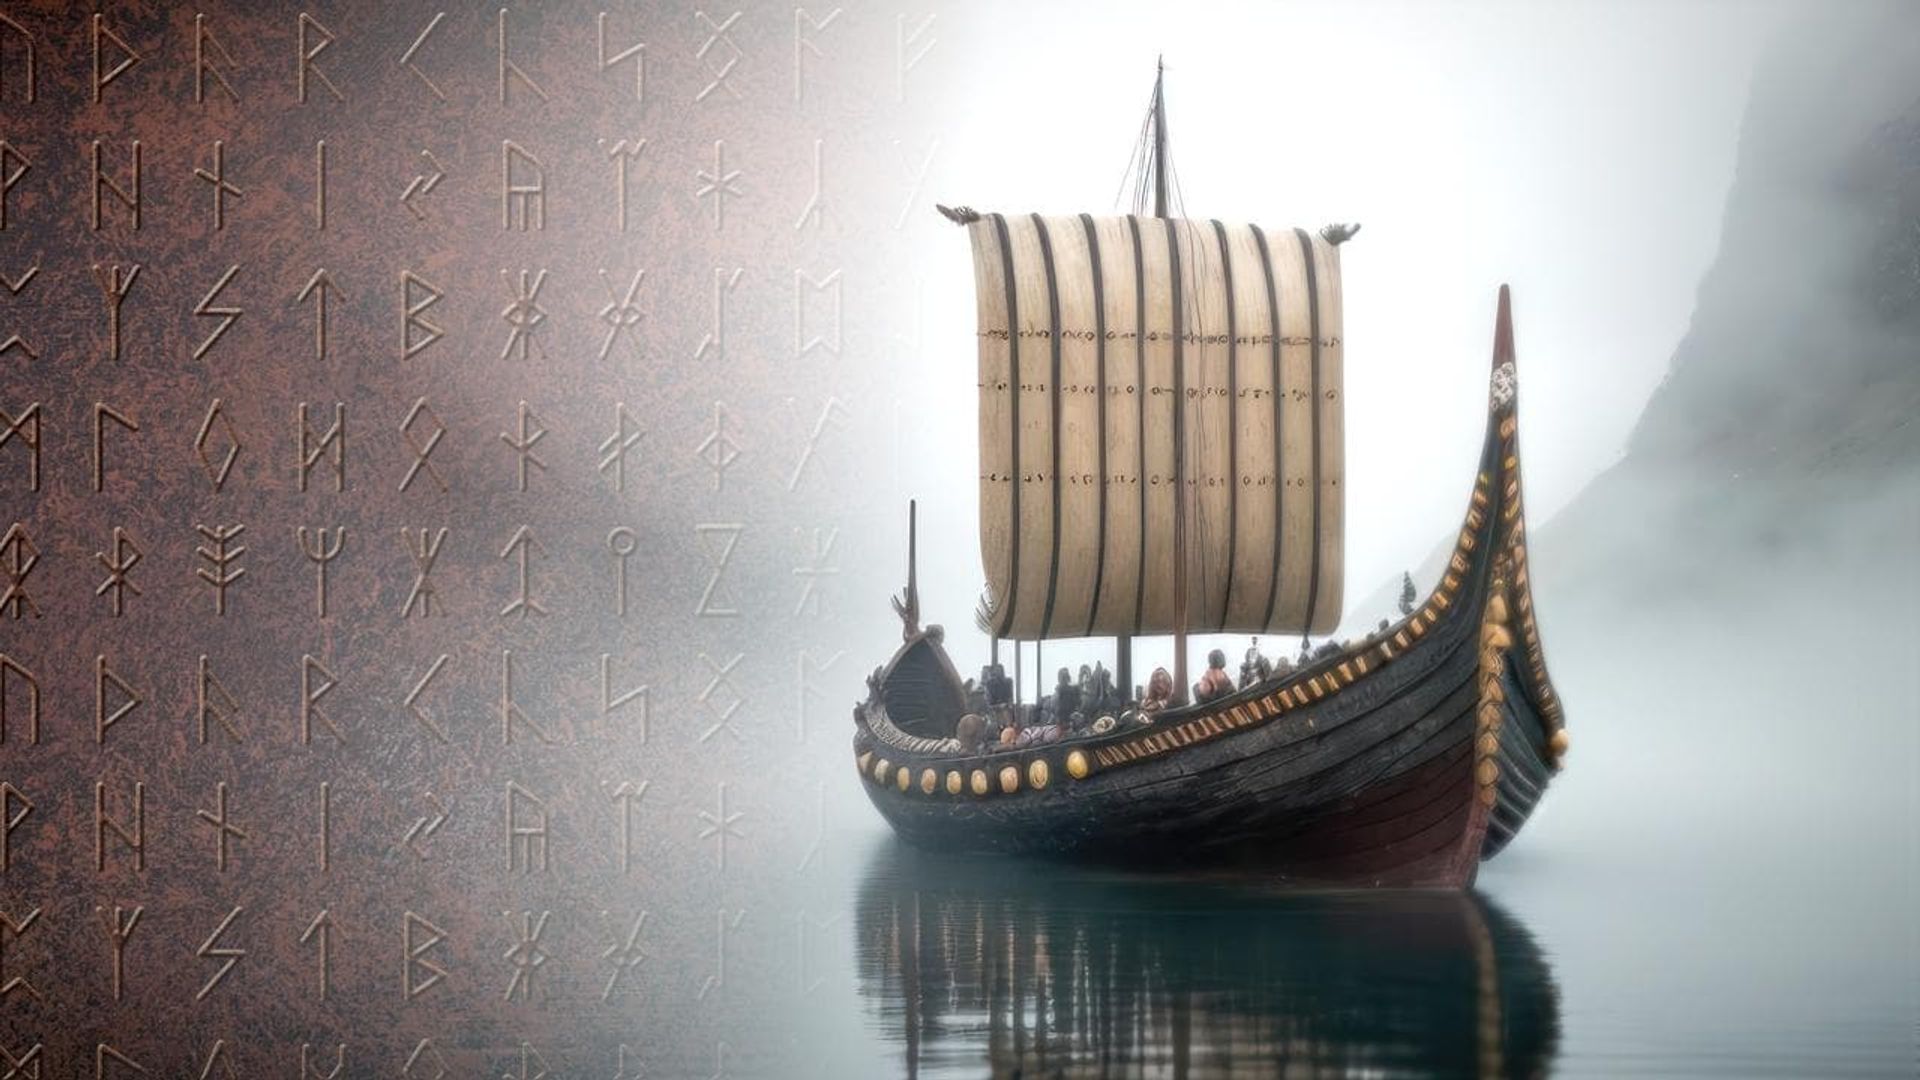 Vikings: The Rise and Fall background